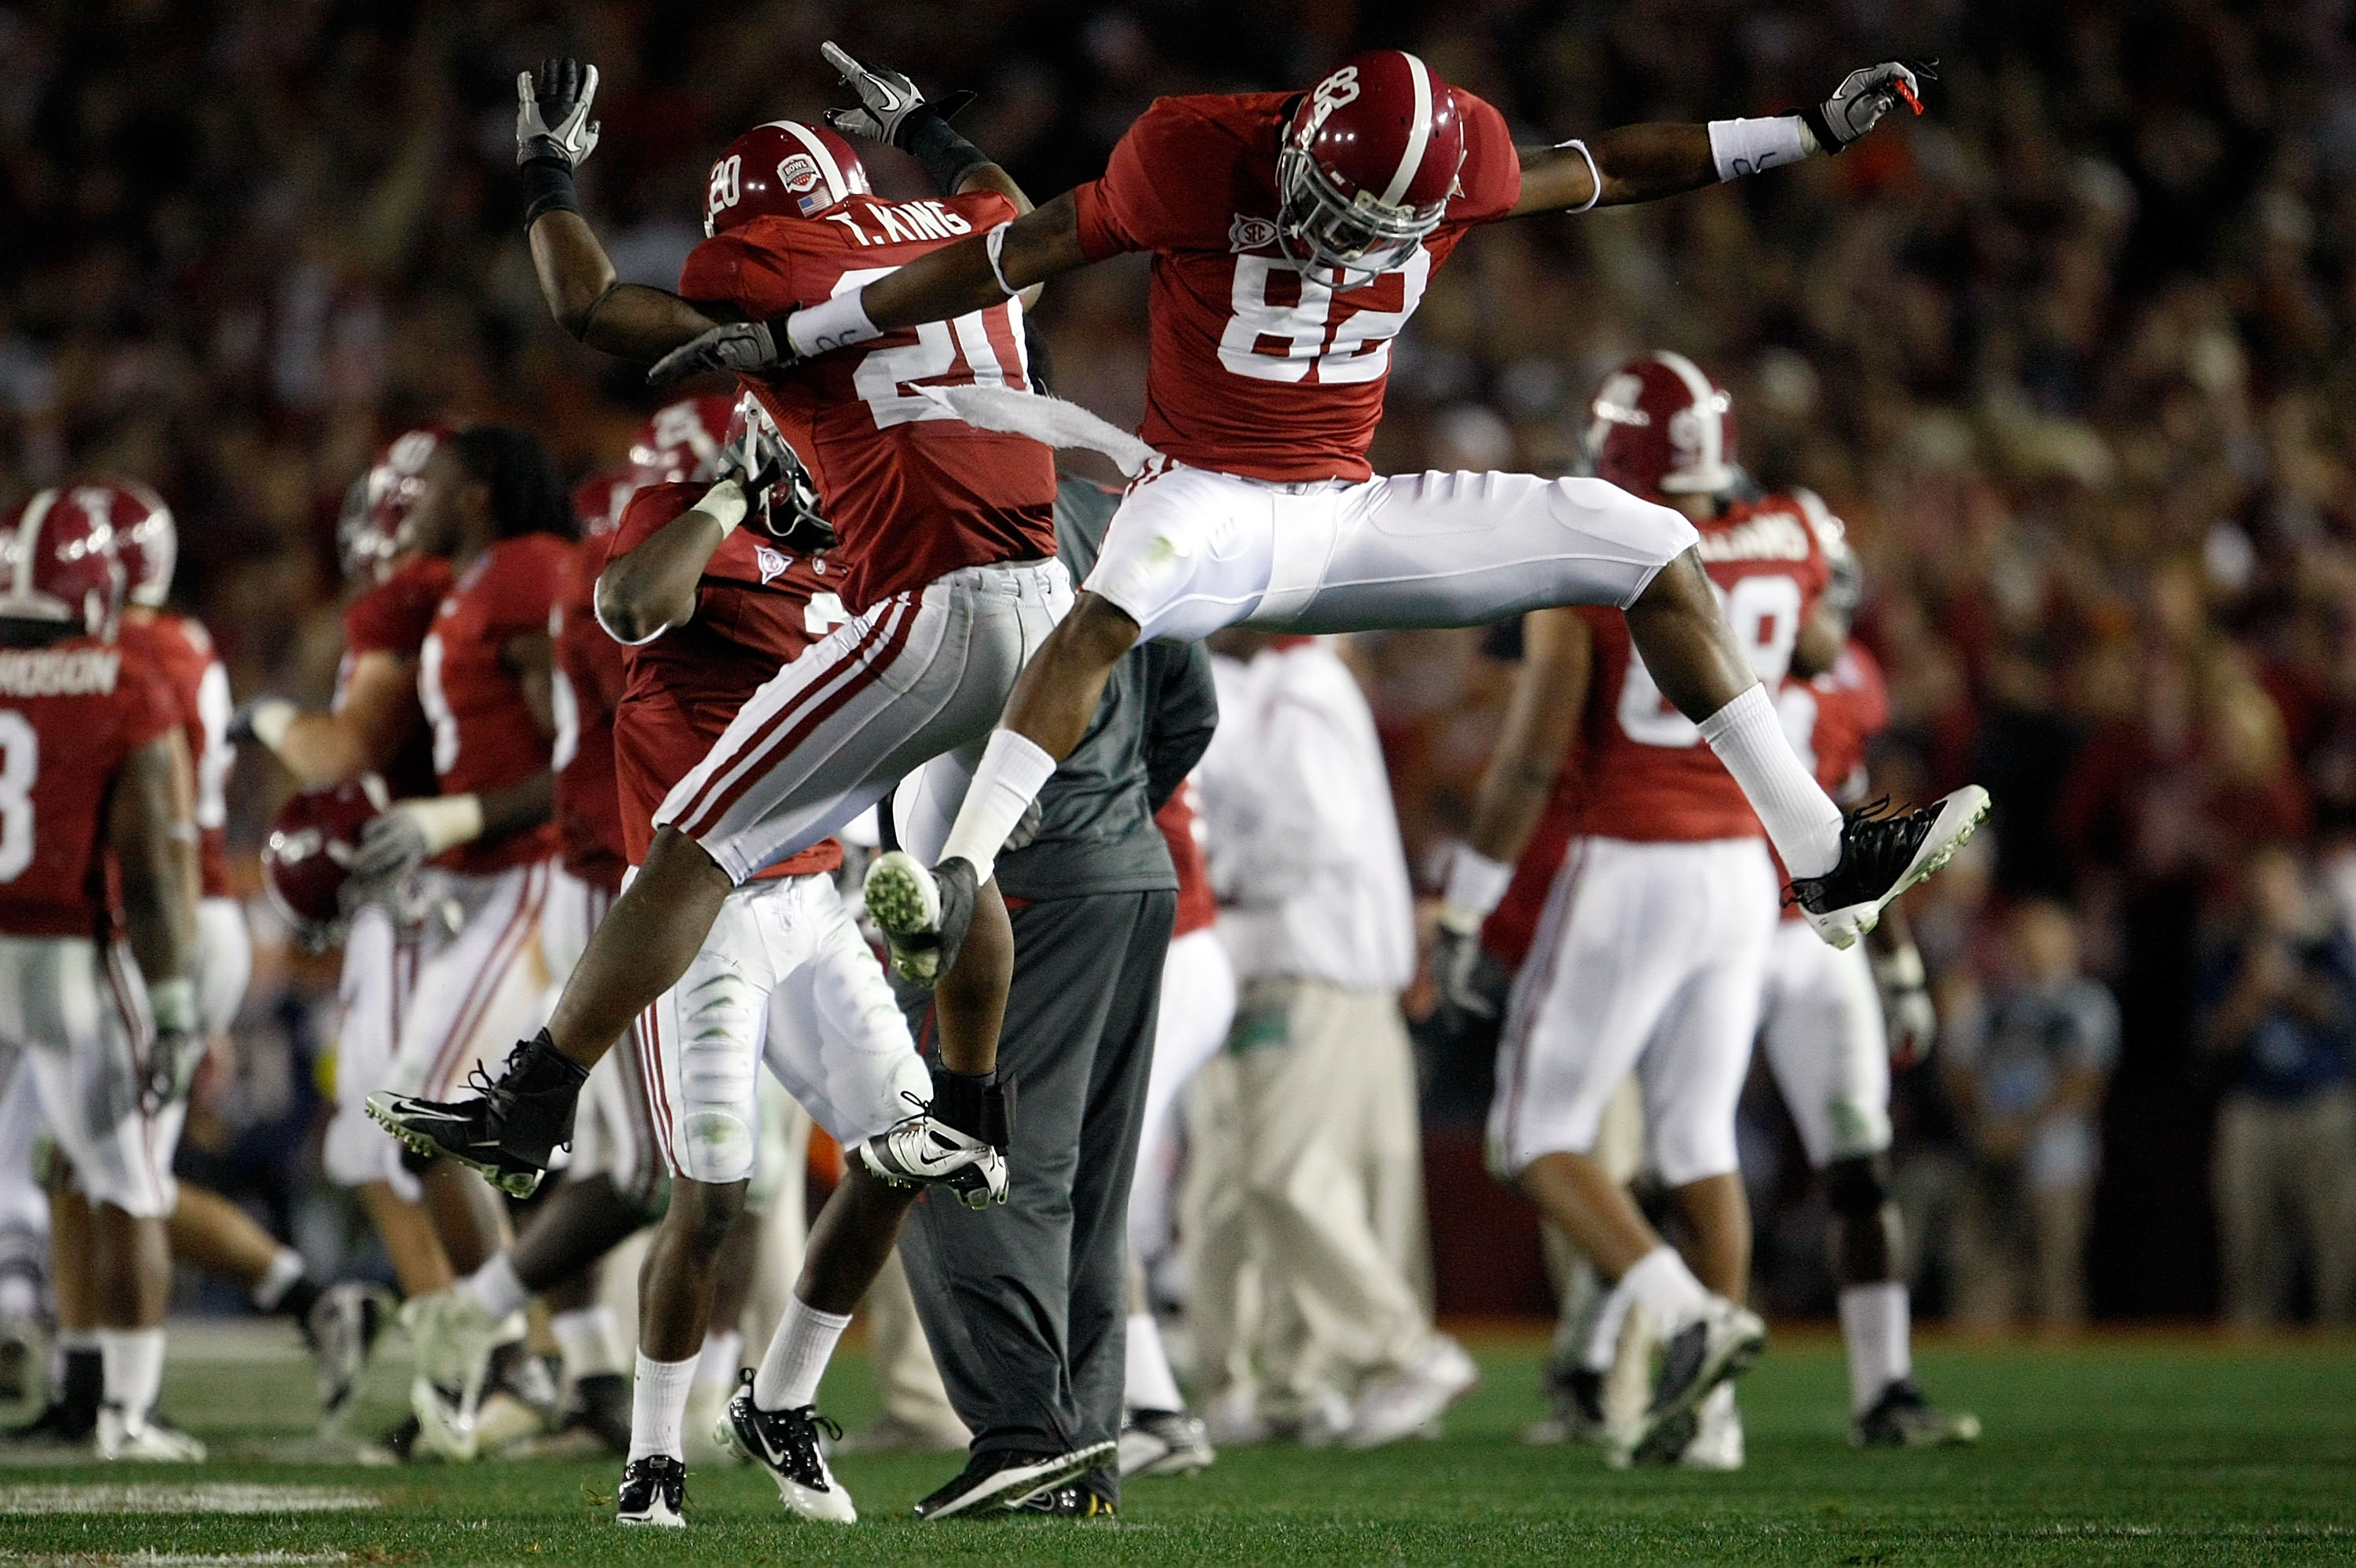 PASADENA, CA - JANUARY 07:  Cornerback Tyrone King #20 and wide receiver Earl Alexander #82 of the Alabama Crimson Tide celebrate during the Citi BCS National Championship game against the Texas Longhorns at the Rose Bowl on January 7, 2010 in Pasadena, C